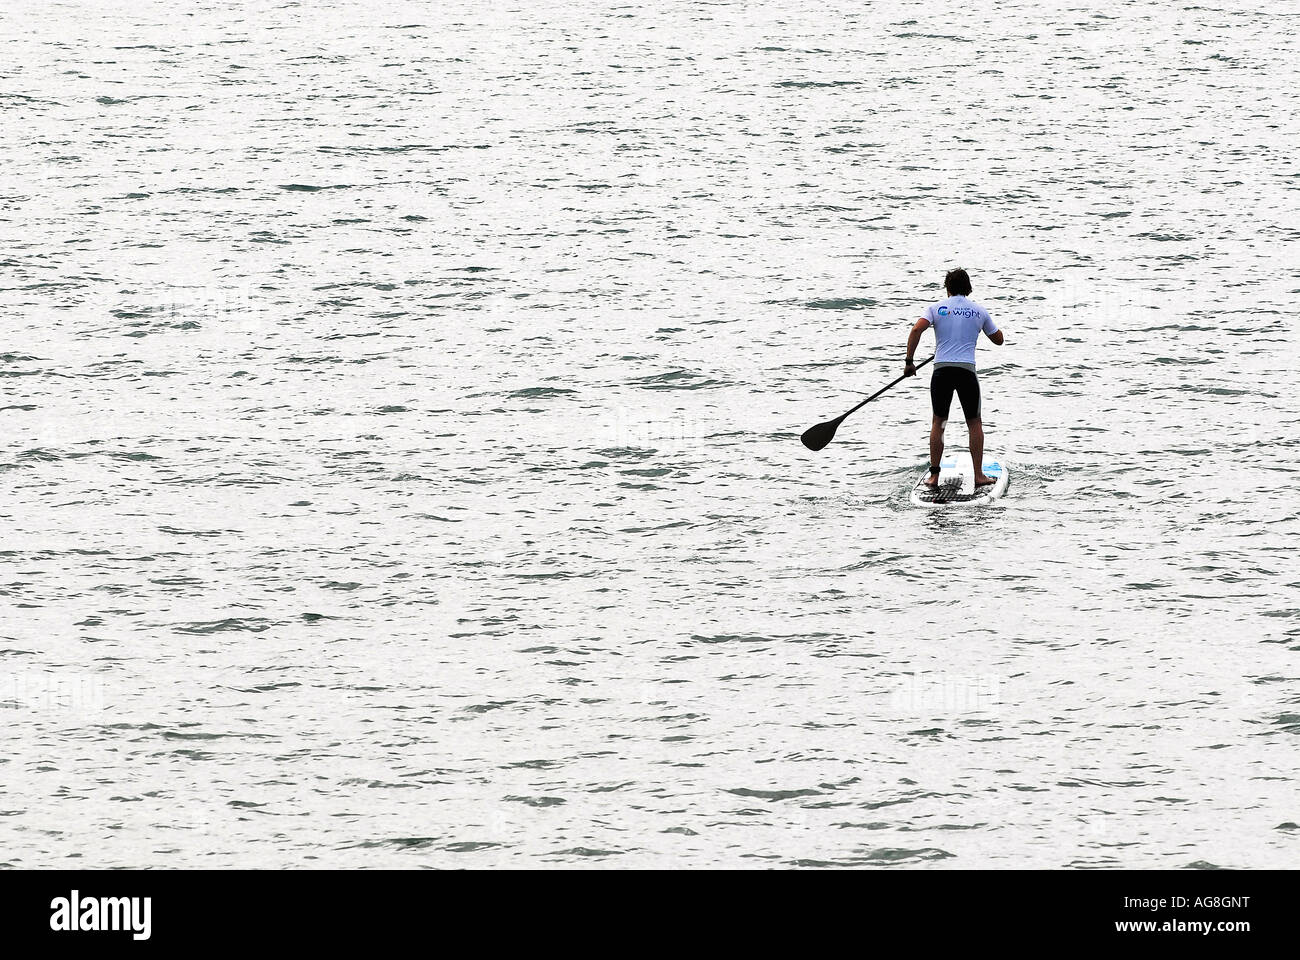 man on surfboard paddling out to sea on a calm day stand up paddle board fitness Stock Photo